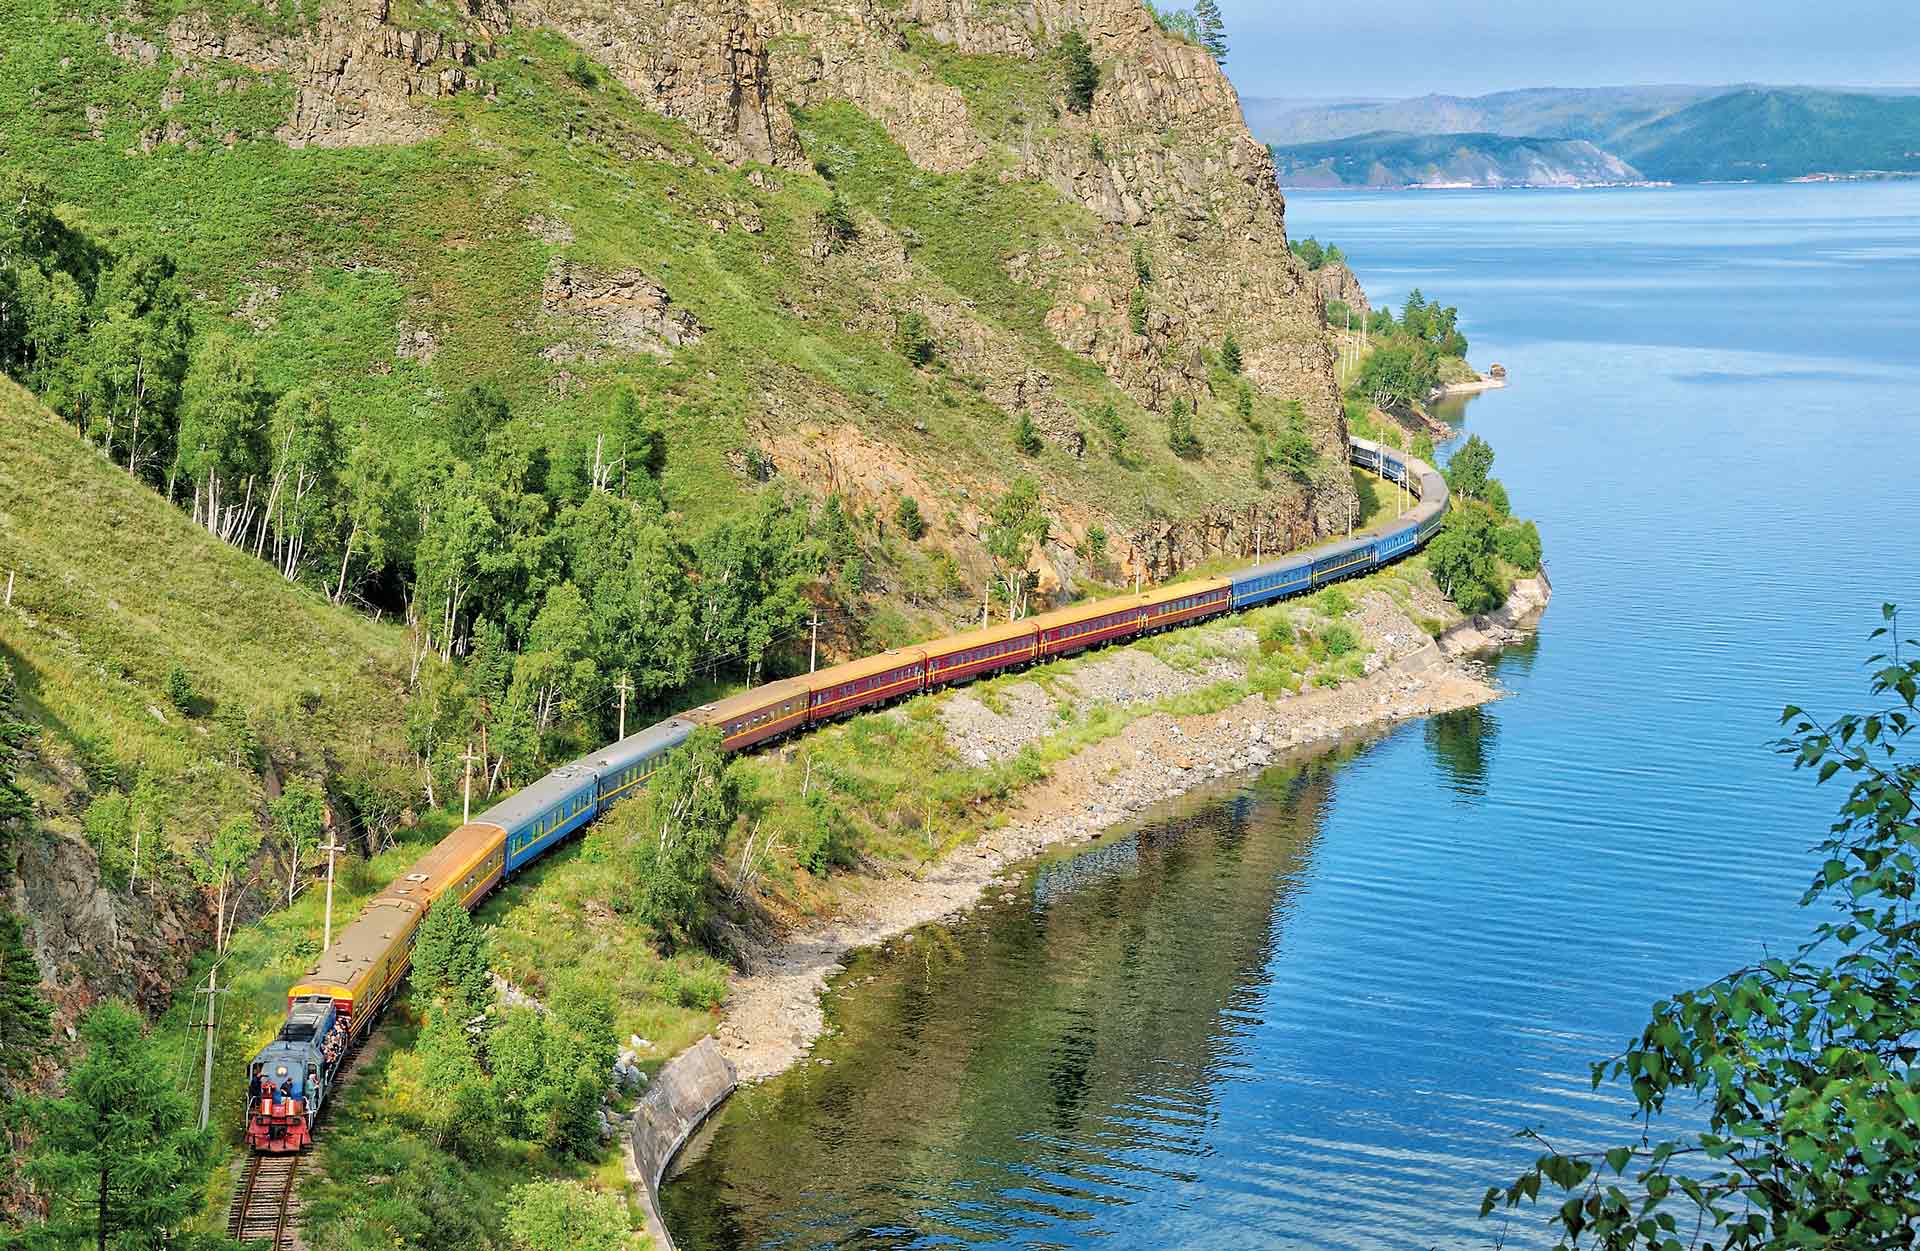 Trans-Siberian Railway from Beijing to Moscow